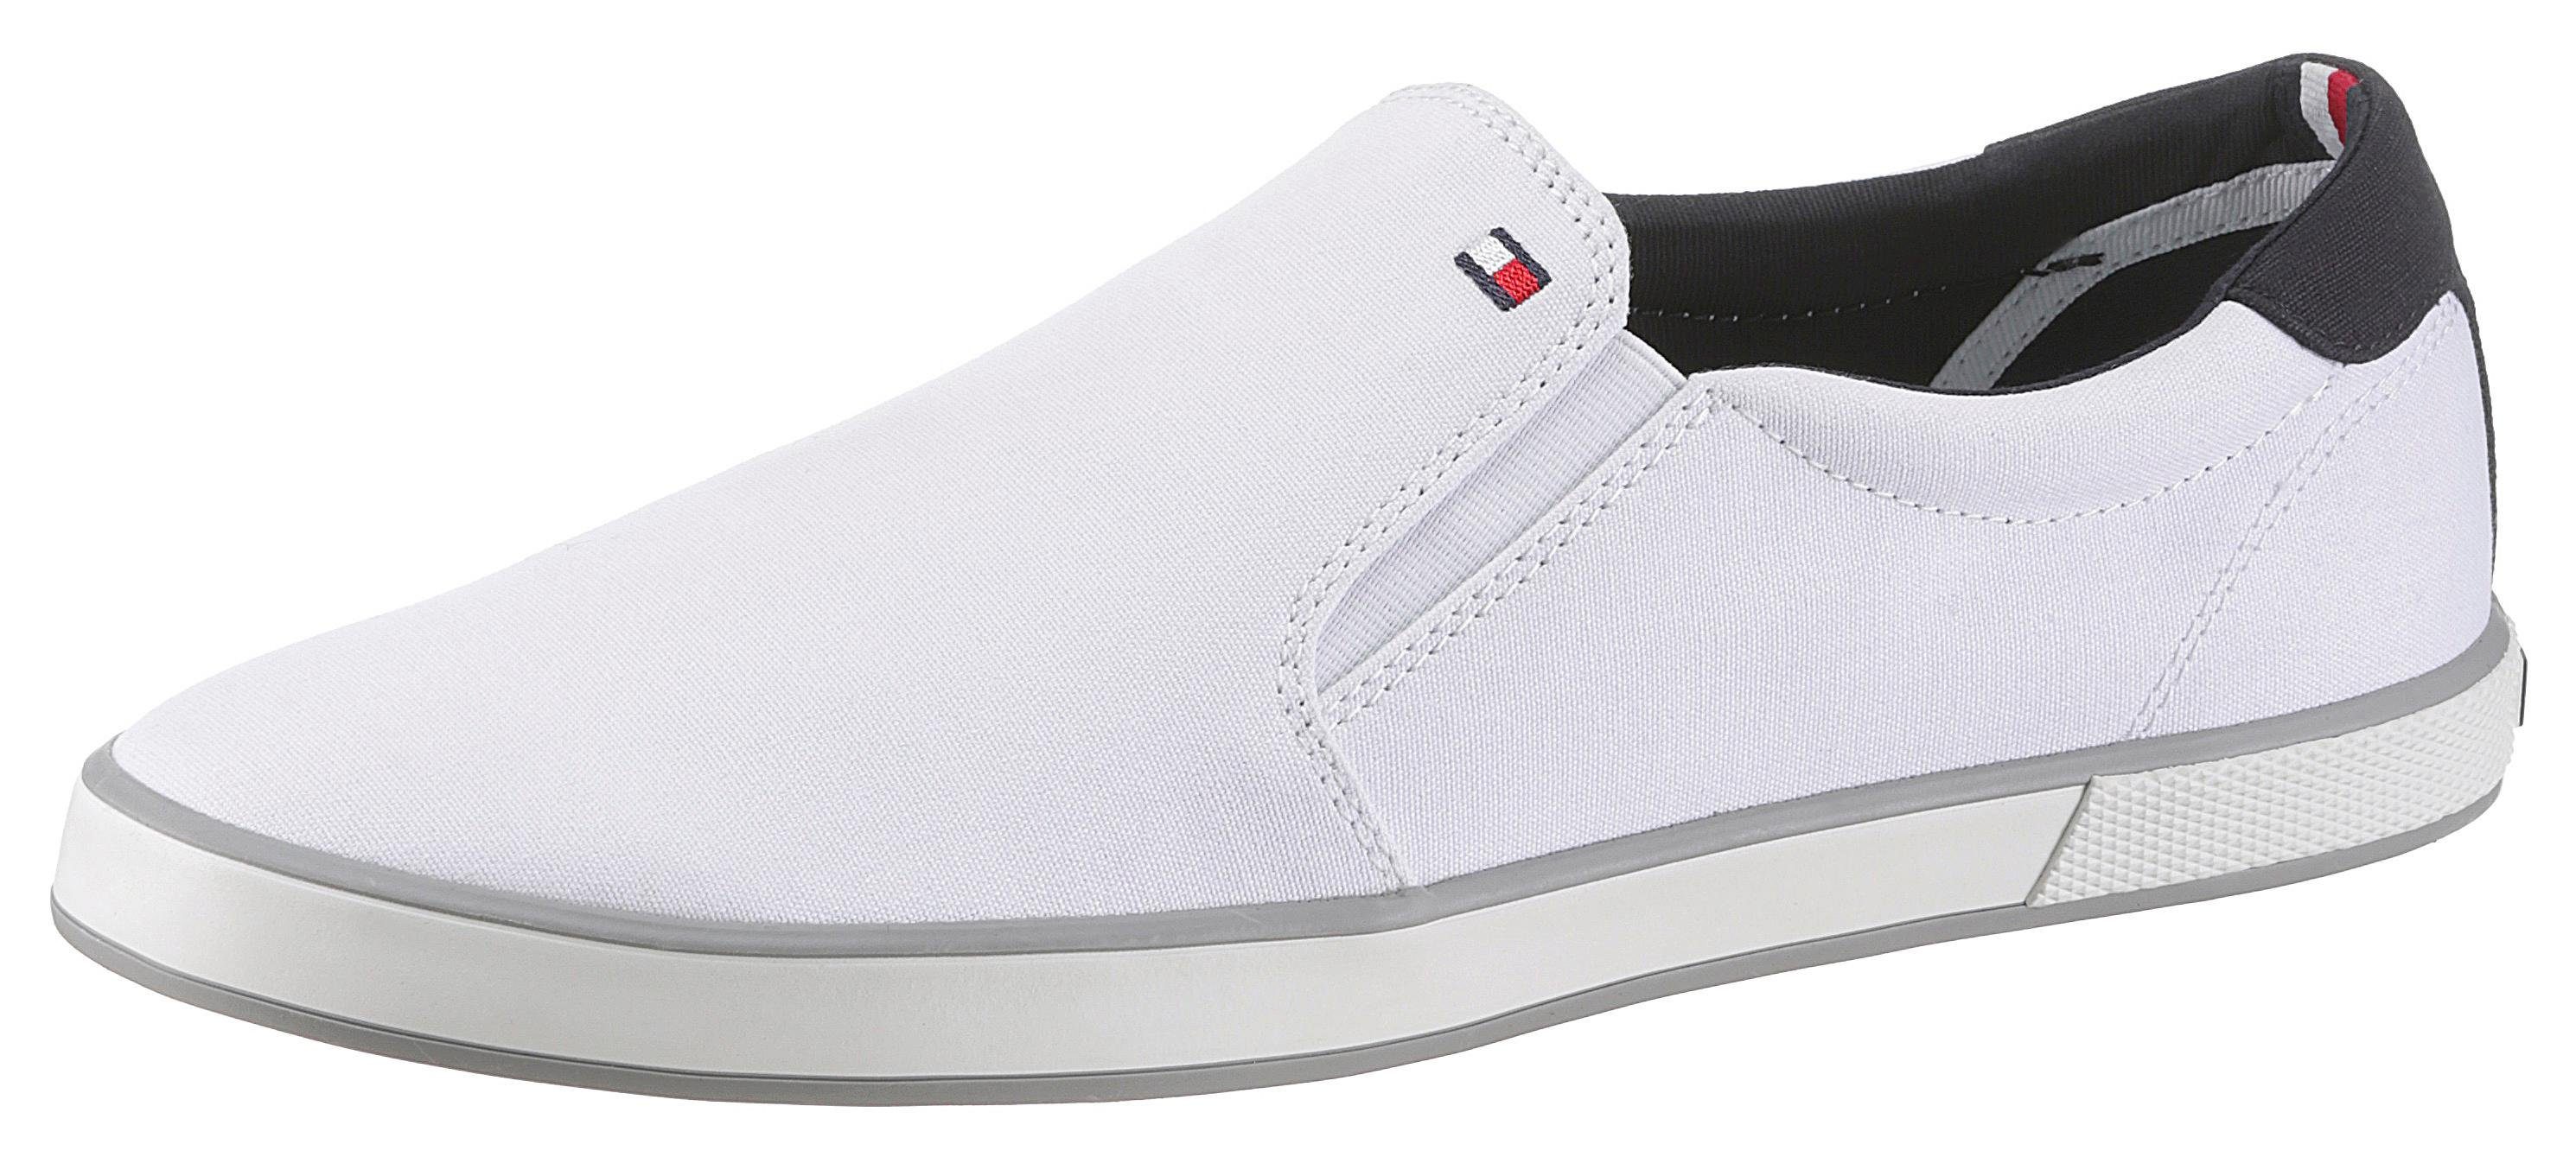 TOMMY HILFIGER »ICONIC SLIP ON SNEAKER« Sneaker | OTTO